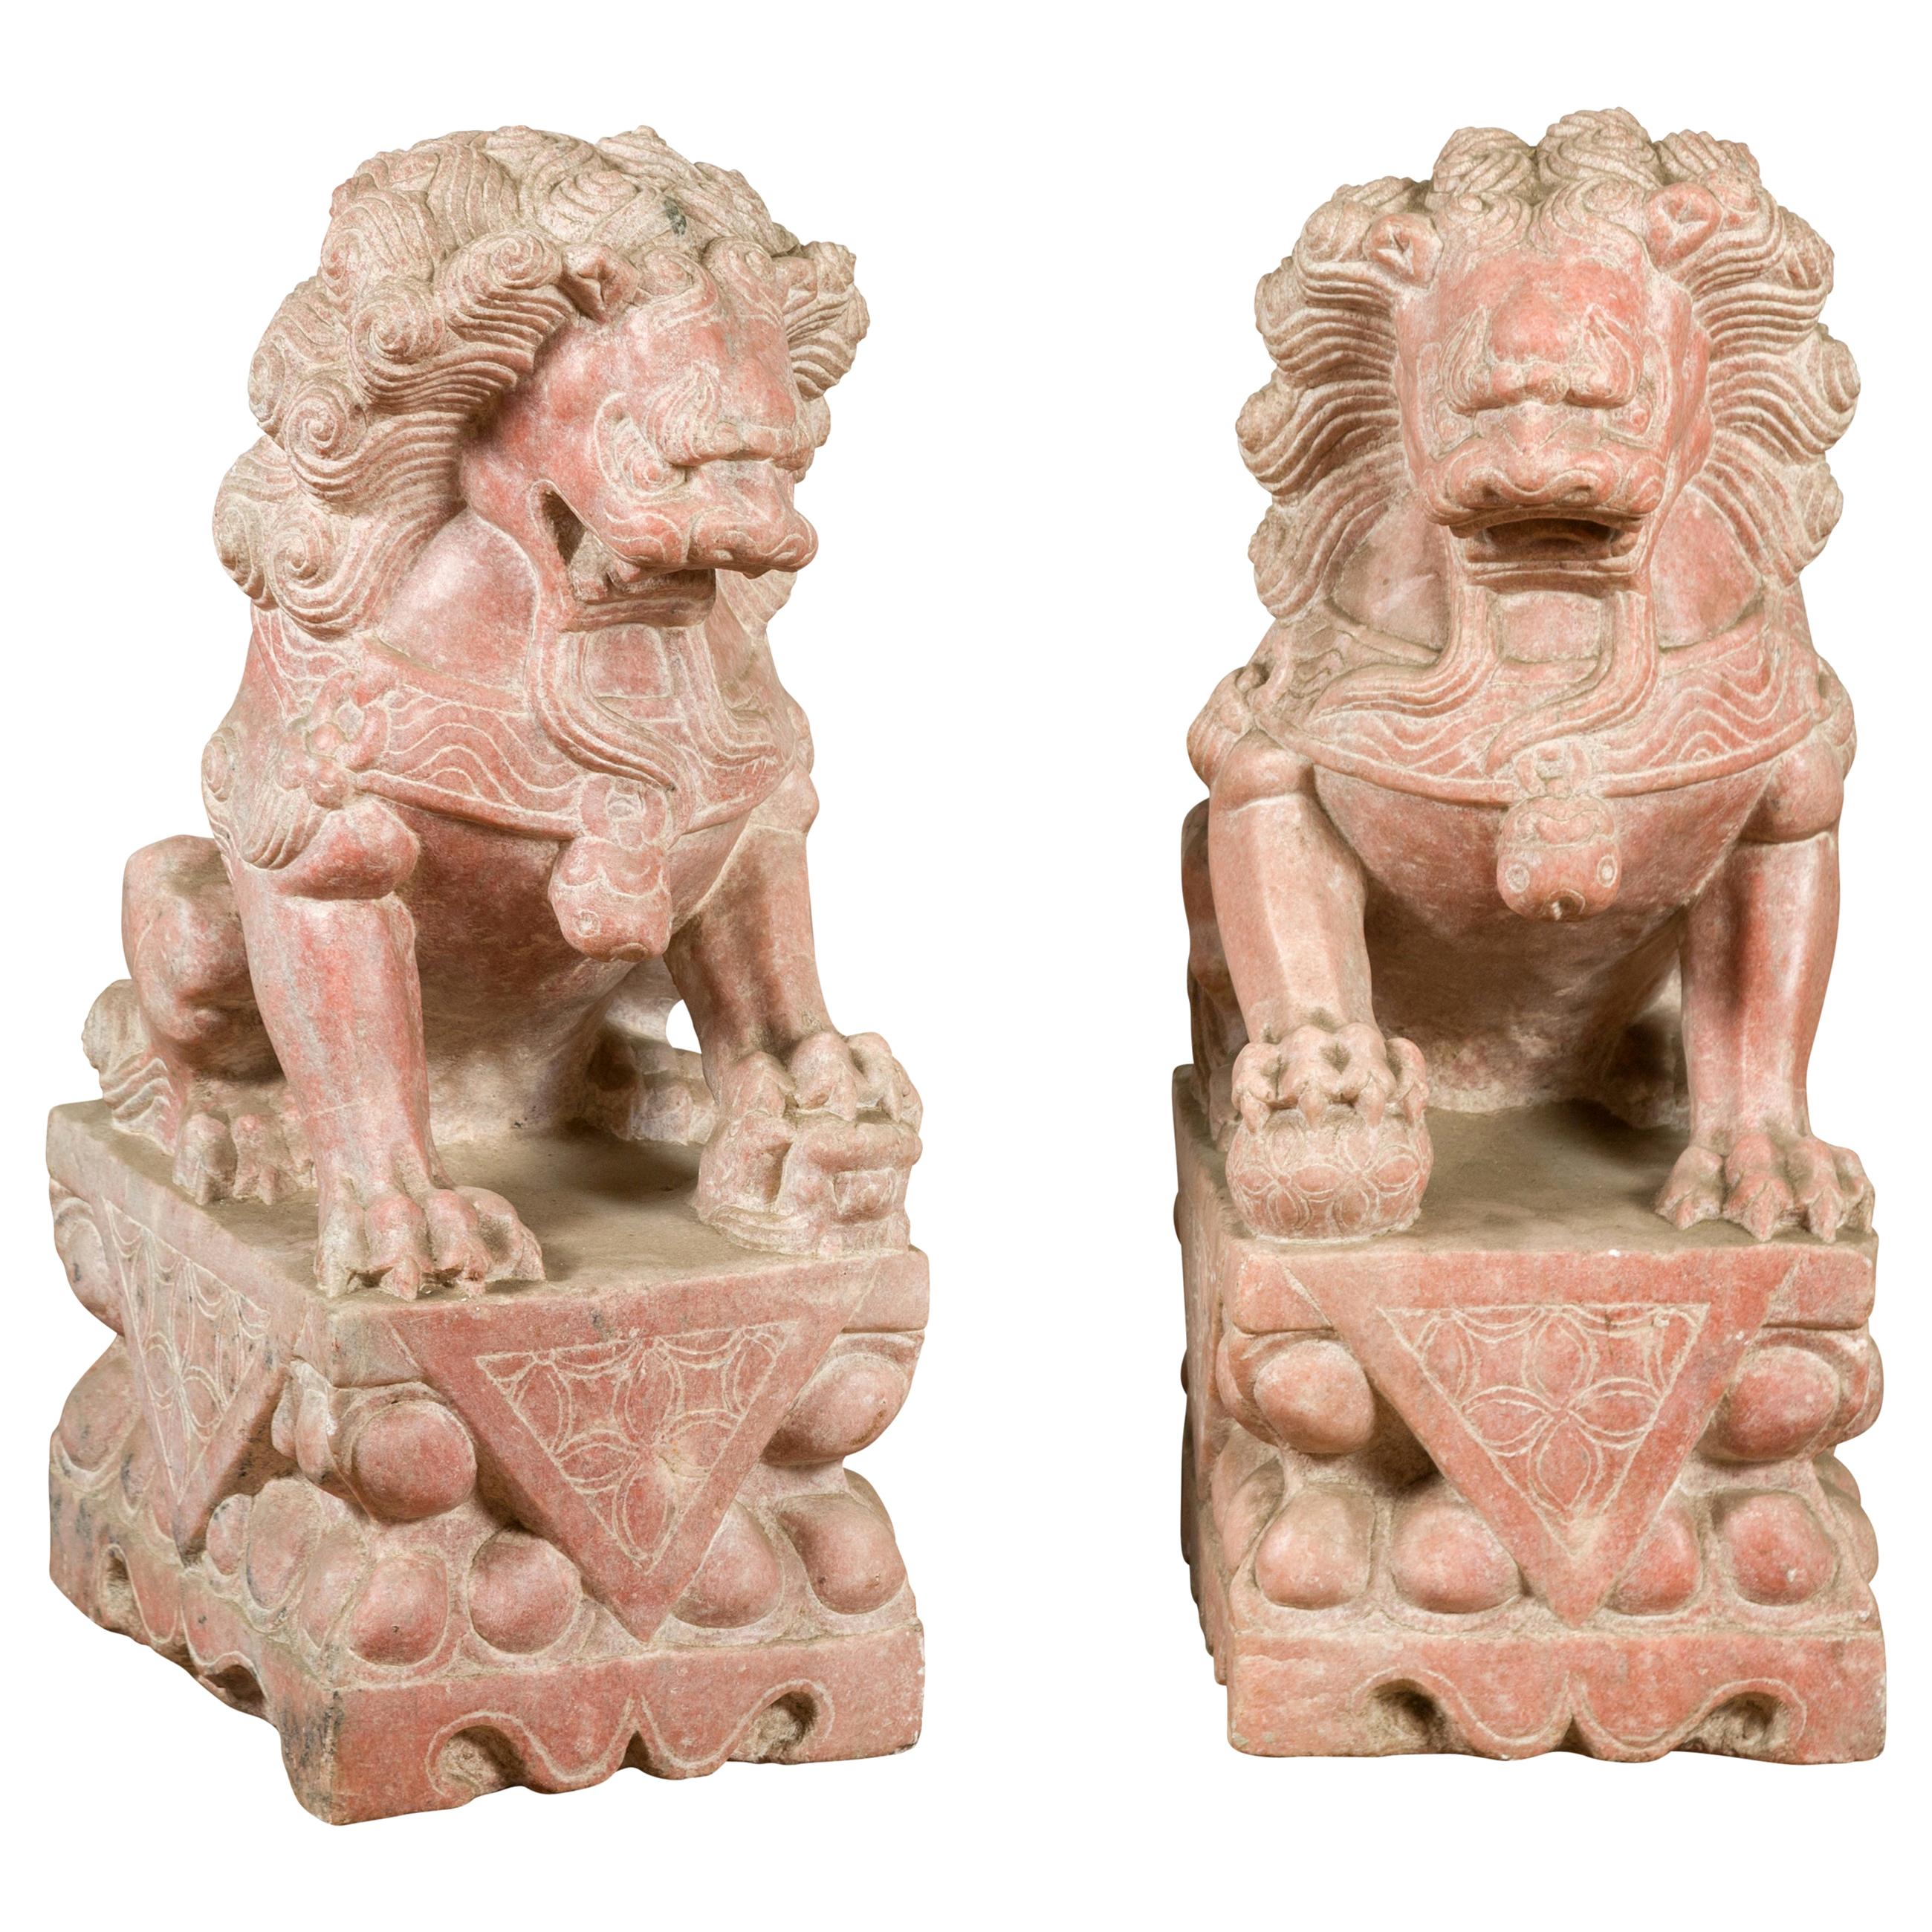 Pair of Chinese Vintage Foo Dogs Guardian Lions on Bases with Sandstone Patina